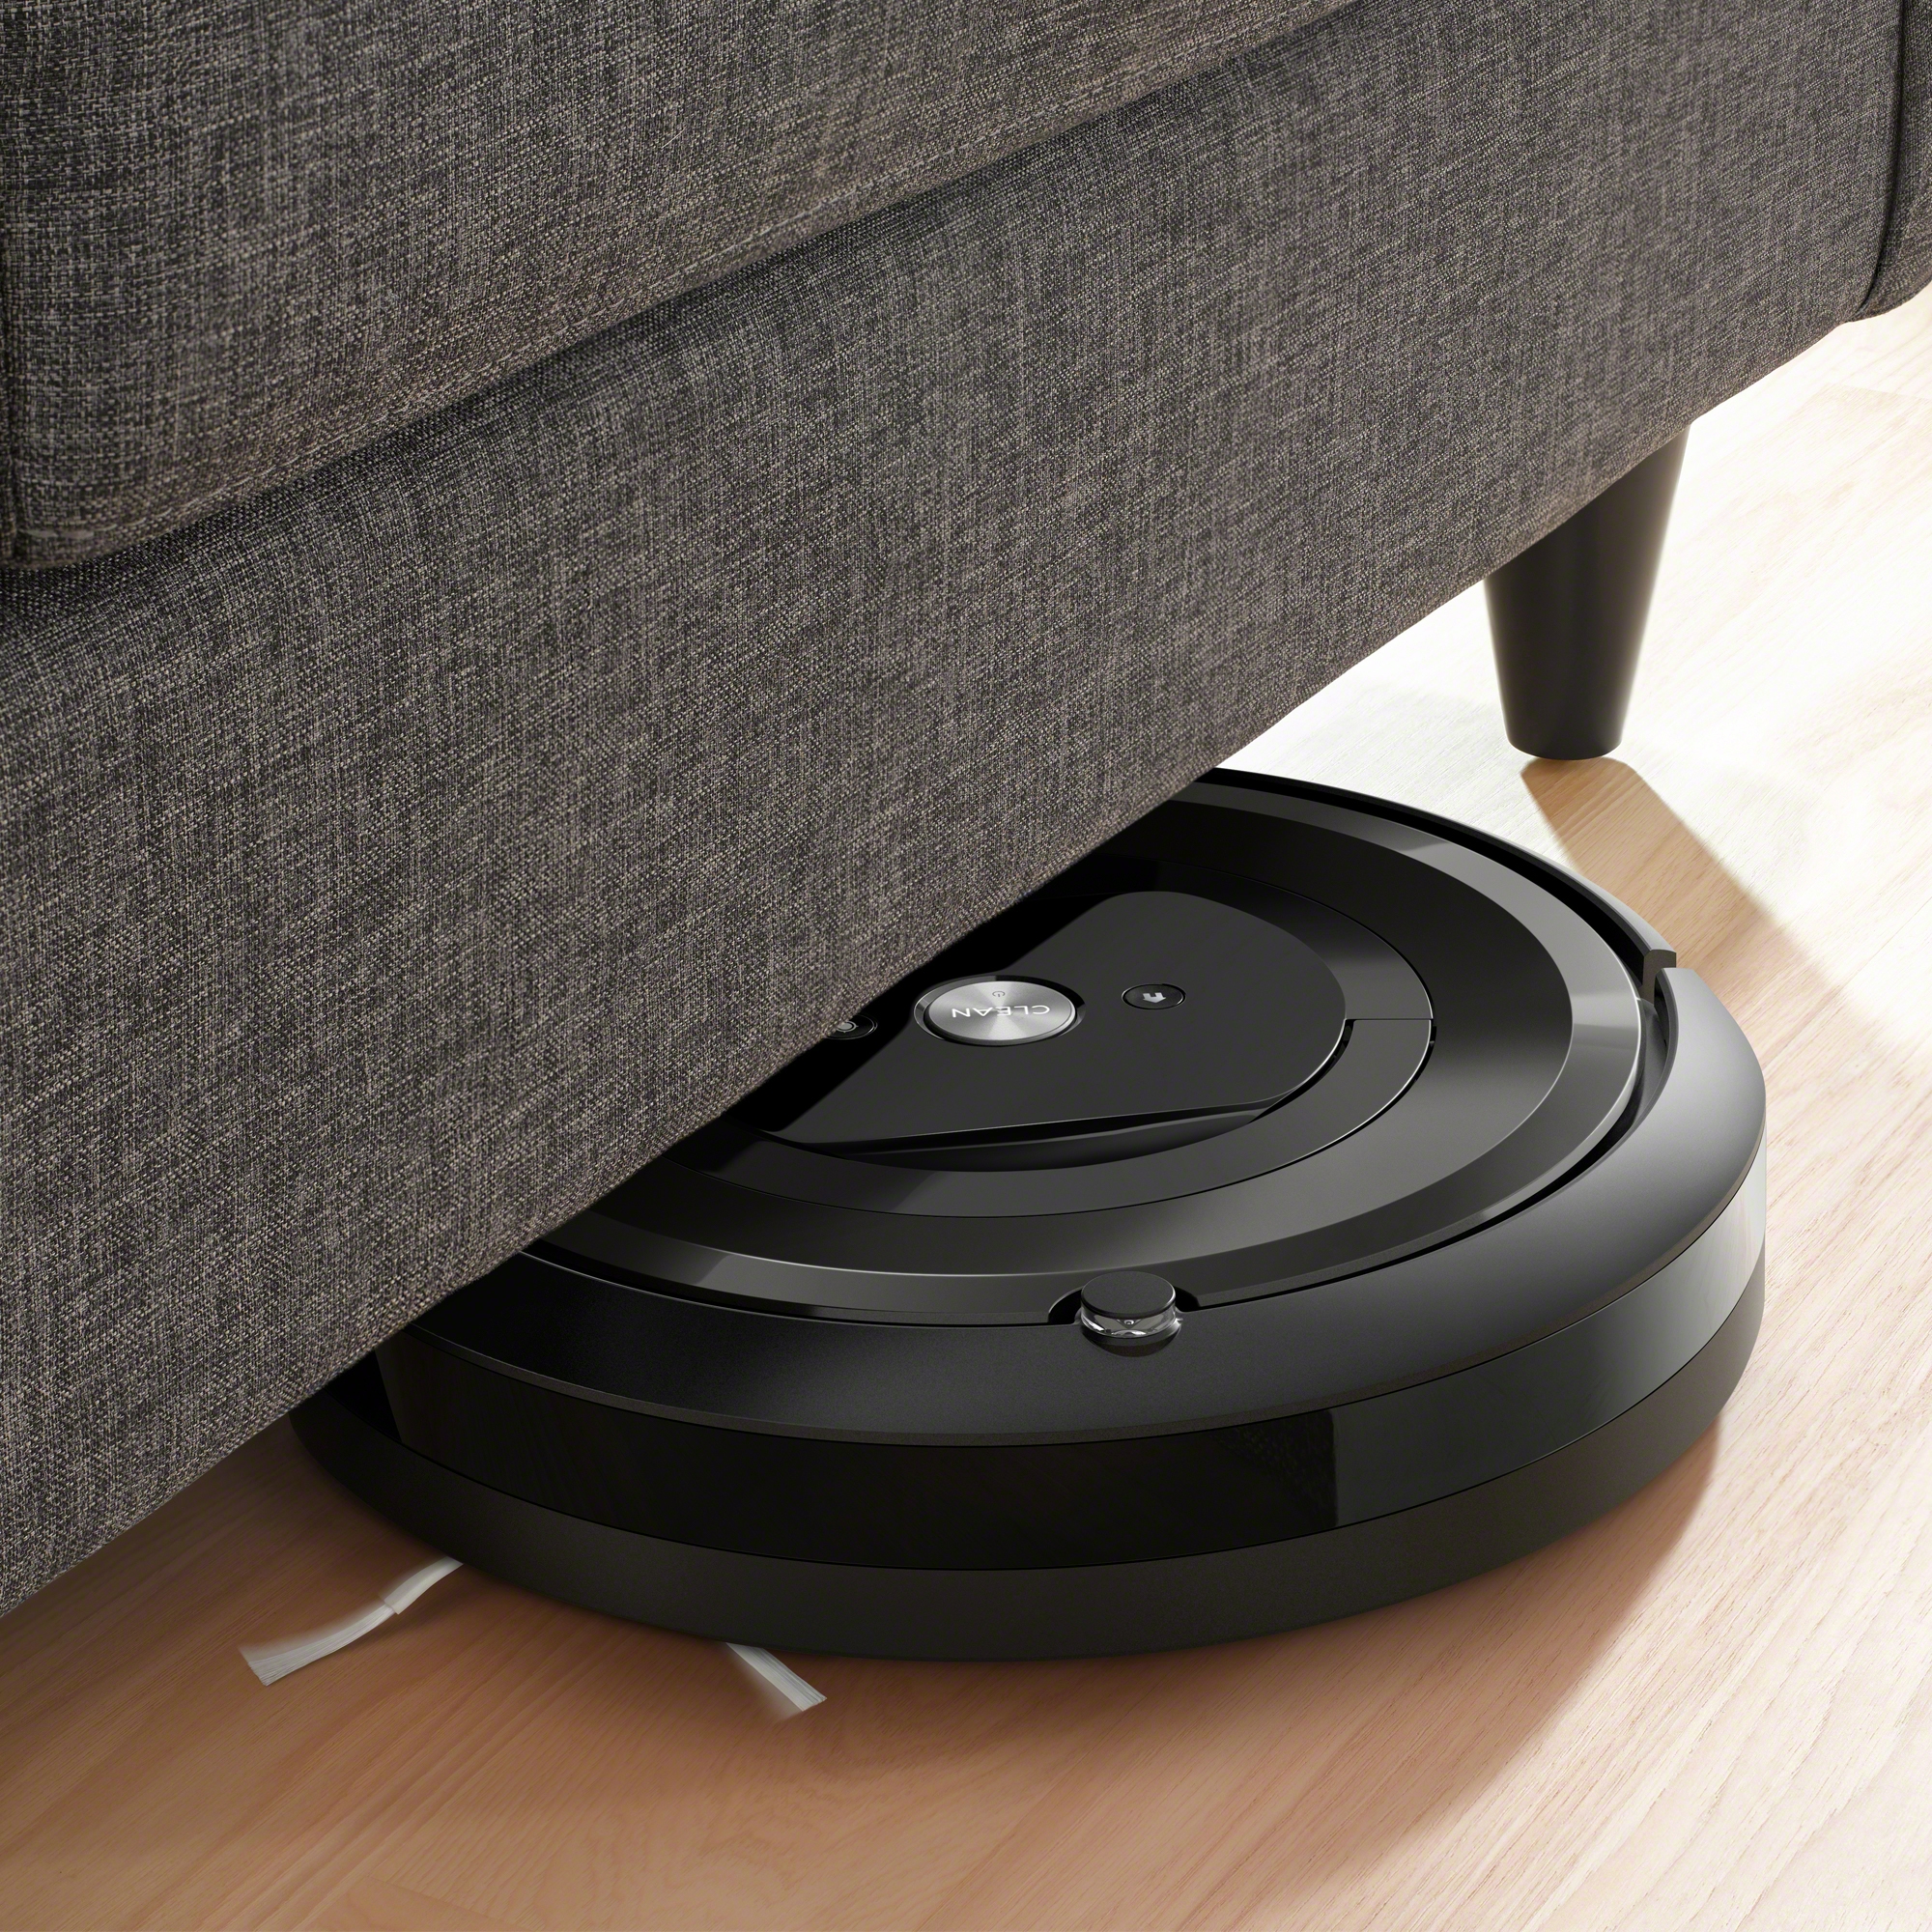 iRobot Roomba e6 (6134) Wi-Fi Connected Robot Vacuum - Wi-Fi Connected, Works with Google, Ideal for Pet Hair, Carpets, Hard, Self-Charging Robotic Vacuum - image 13 of 15